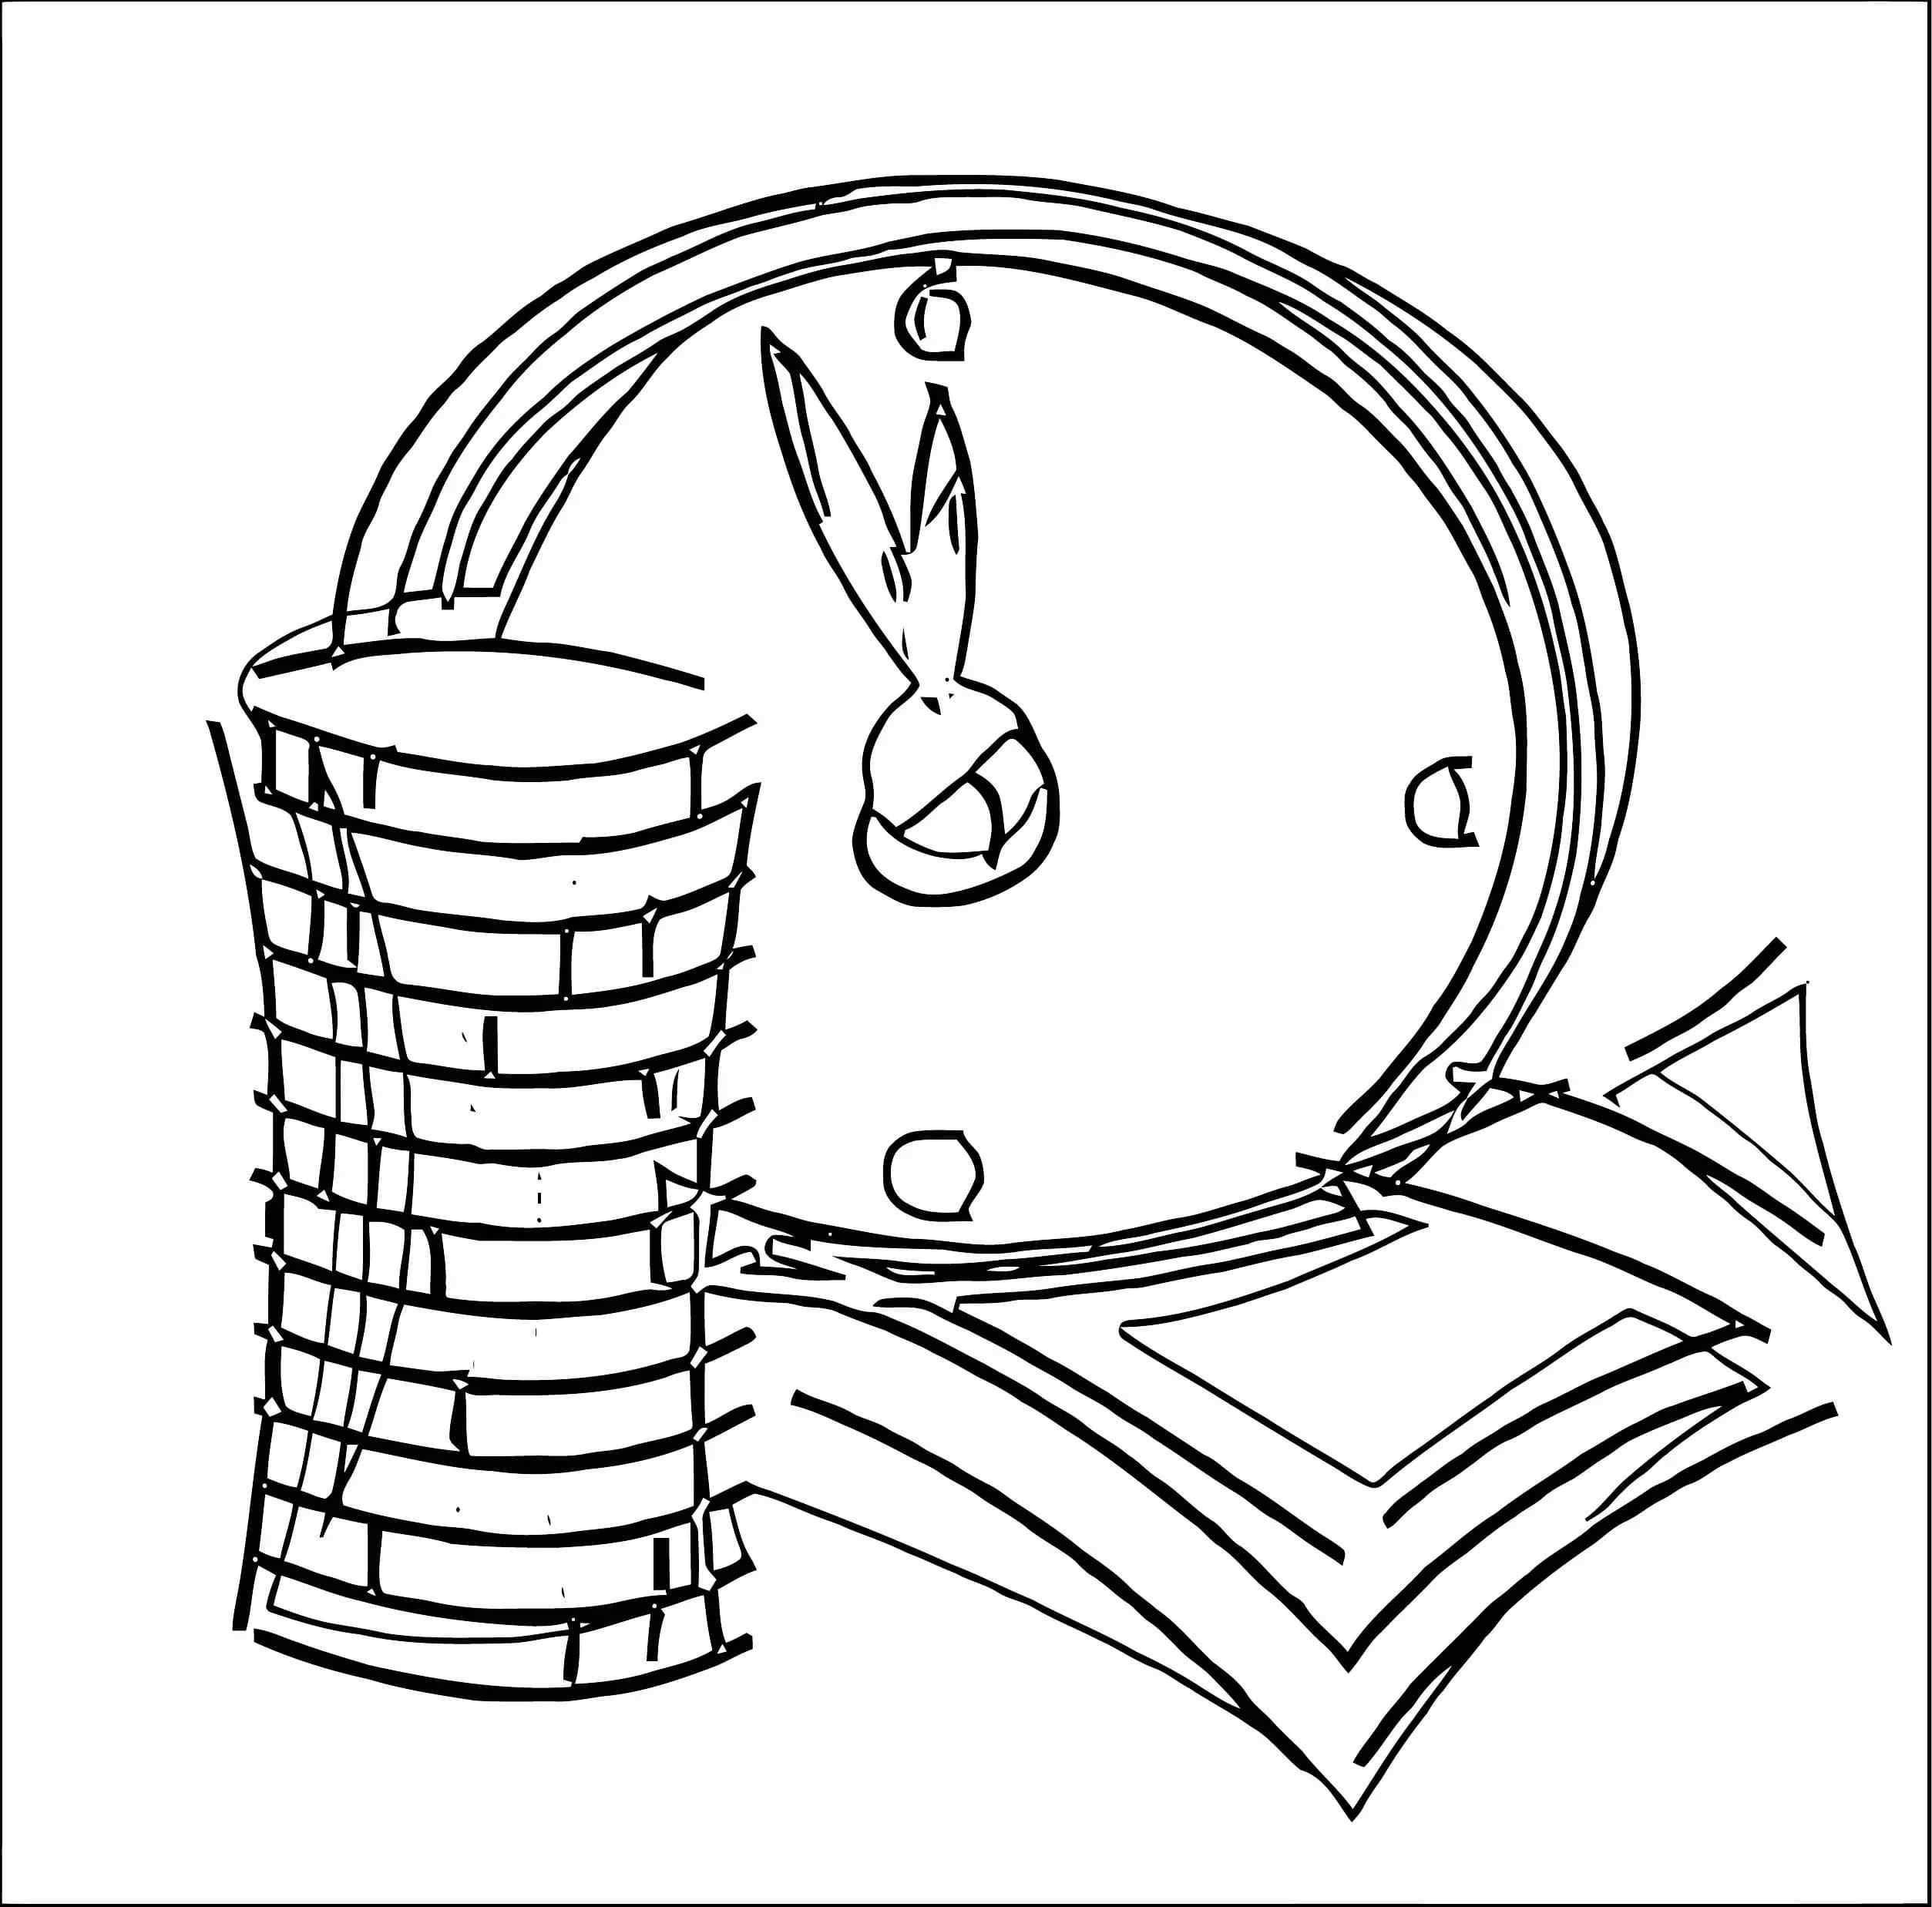 Universal Equivalent For Money Coloring Page